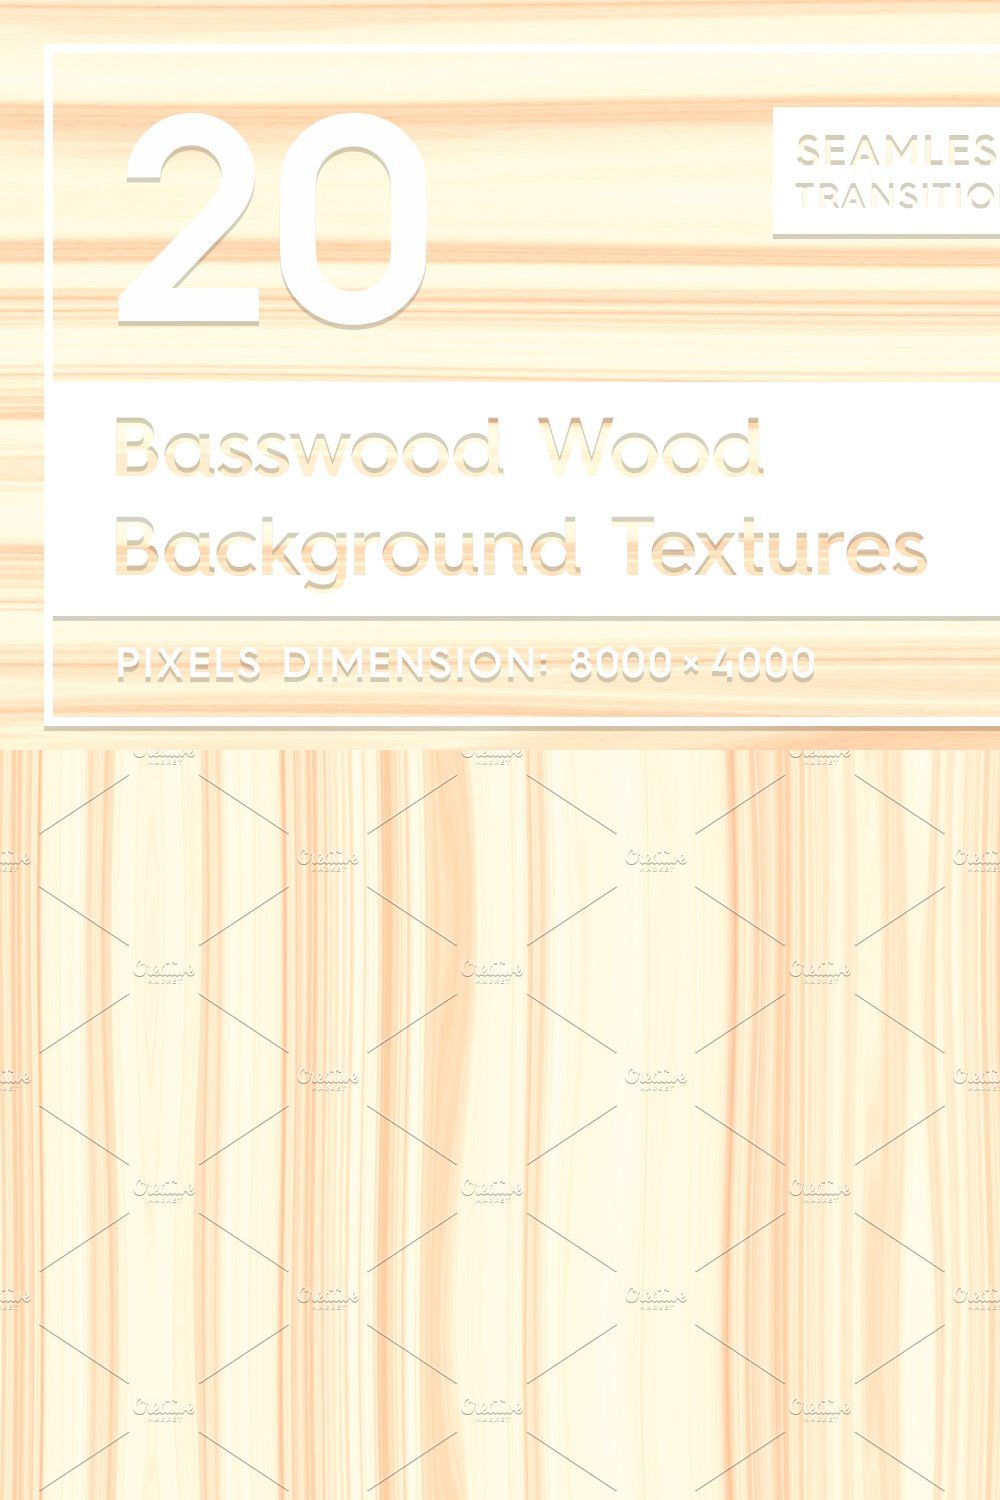 20 Basswood Wood Background Textures pinterest preview image.